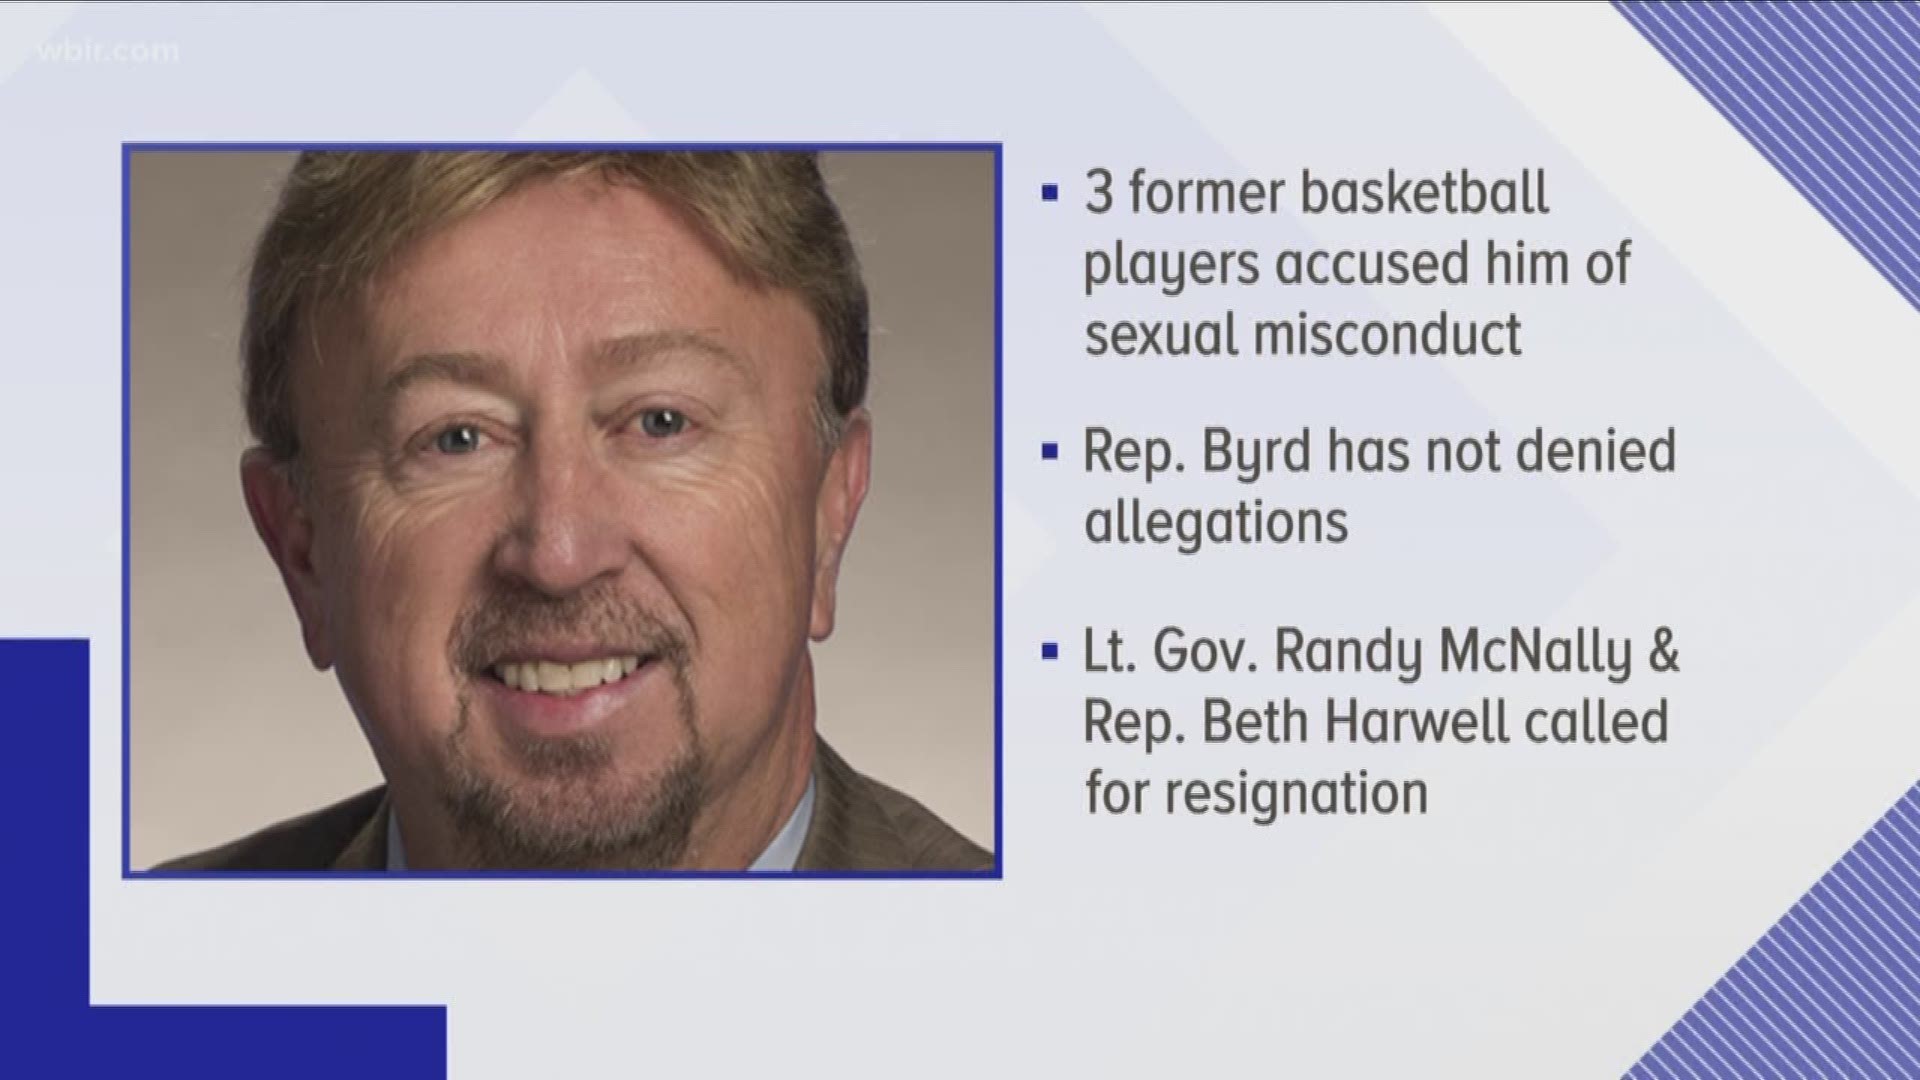 A Tennessee lawmaker announced he'll run for re-election despite allegations of sexual misconduct.